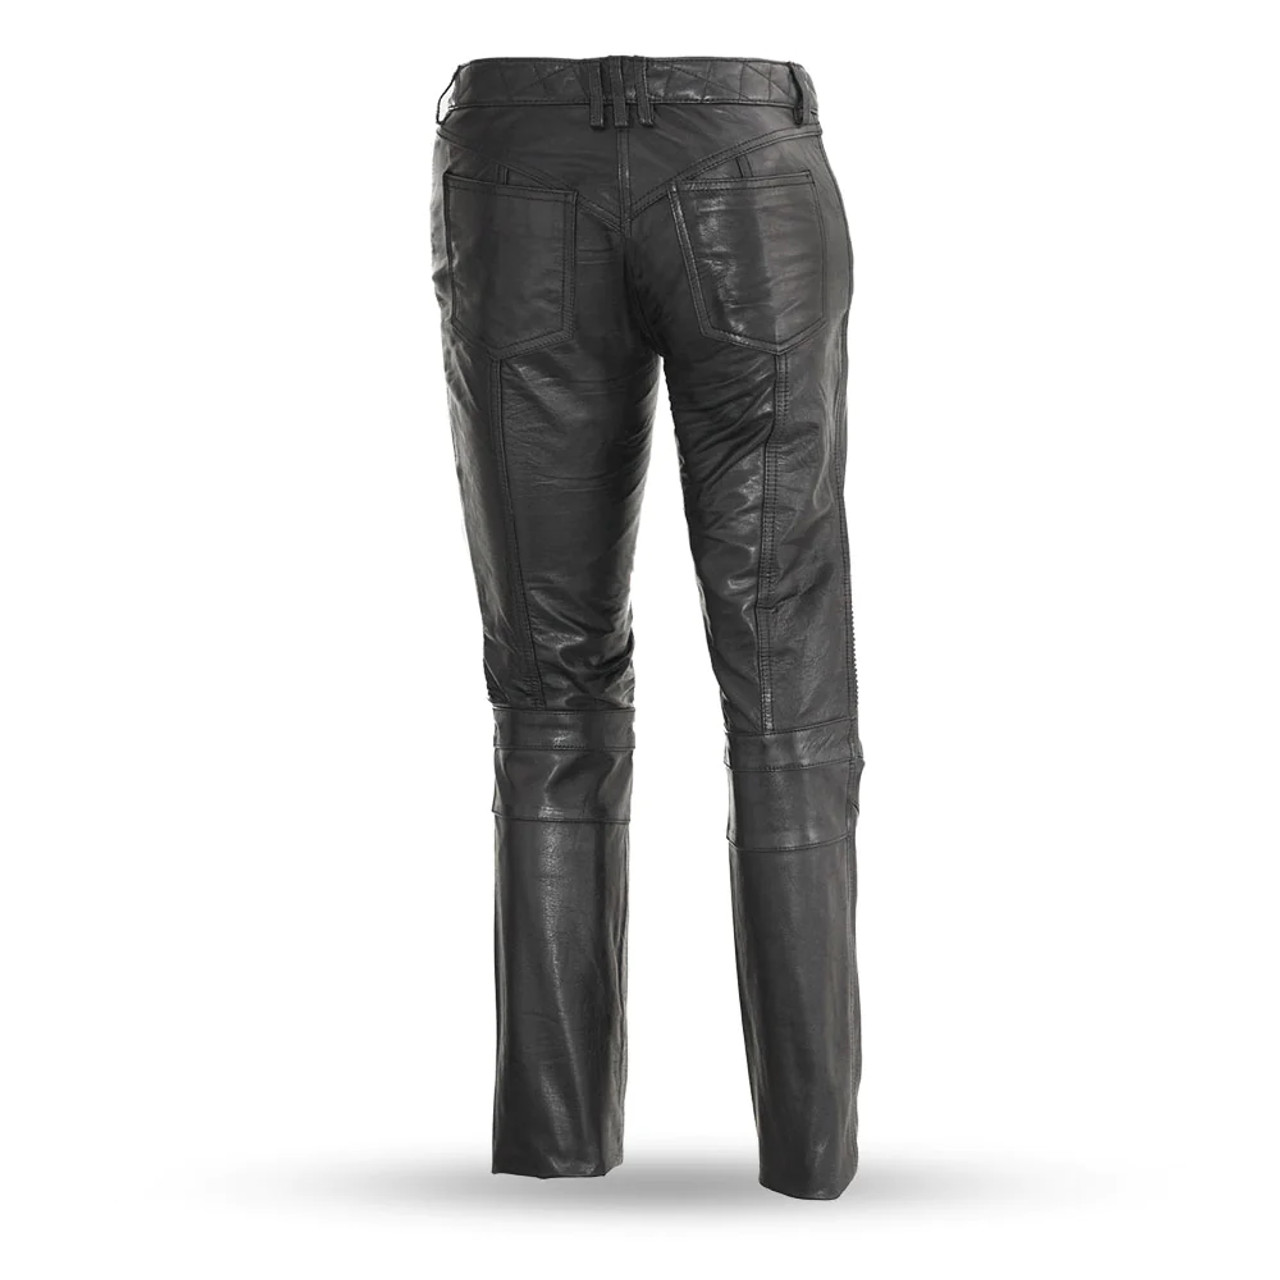 JTS 1716 Ladies Leather Trousers - FREE UK DELIVERY & RETURNS - JTS Biker  Clothing